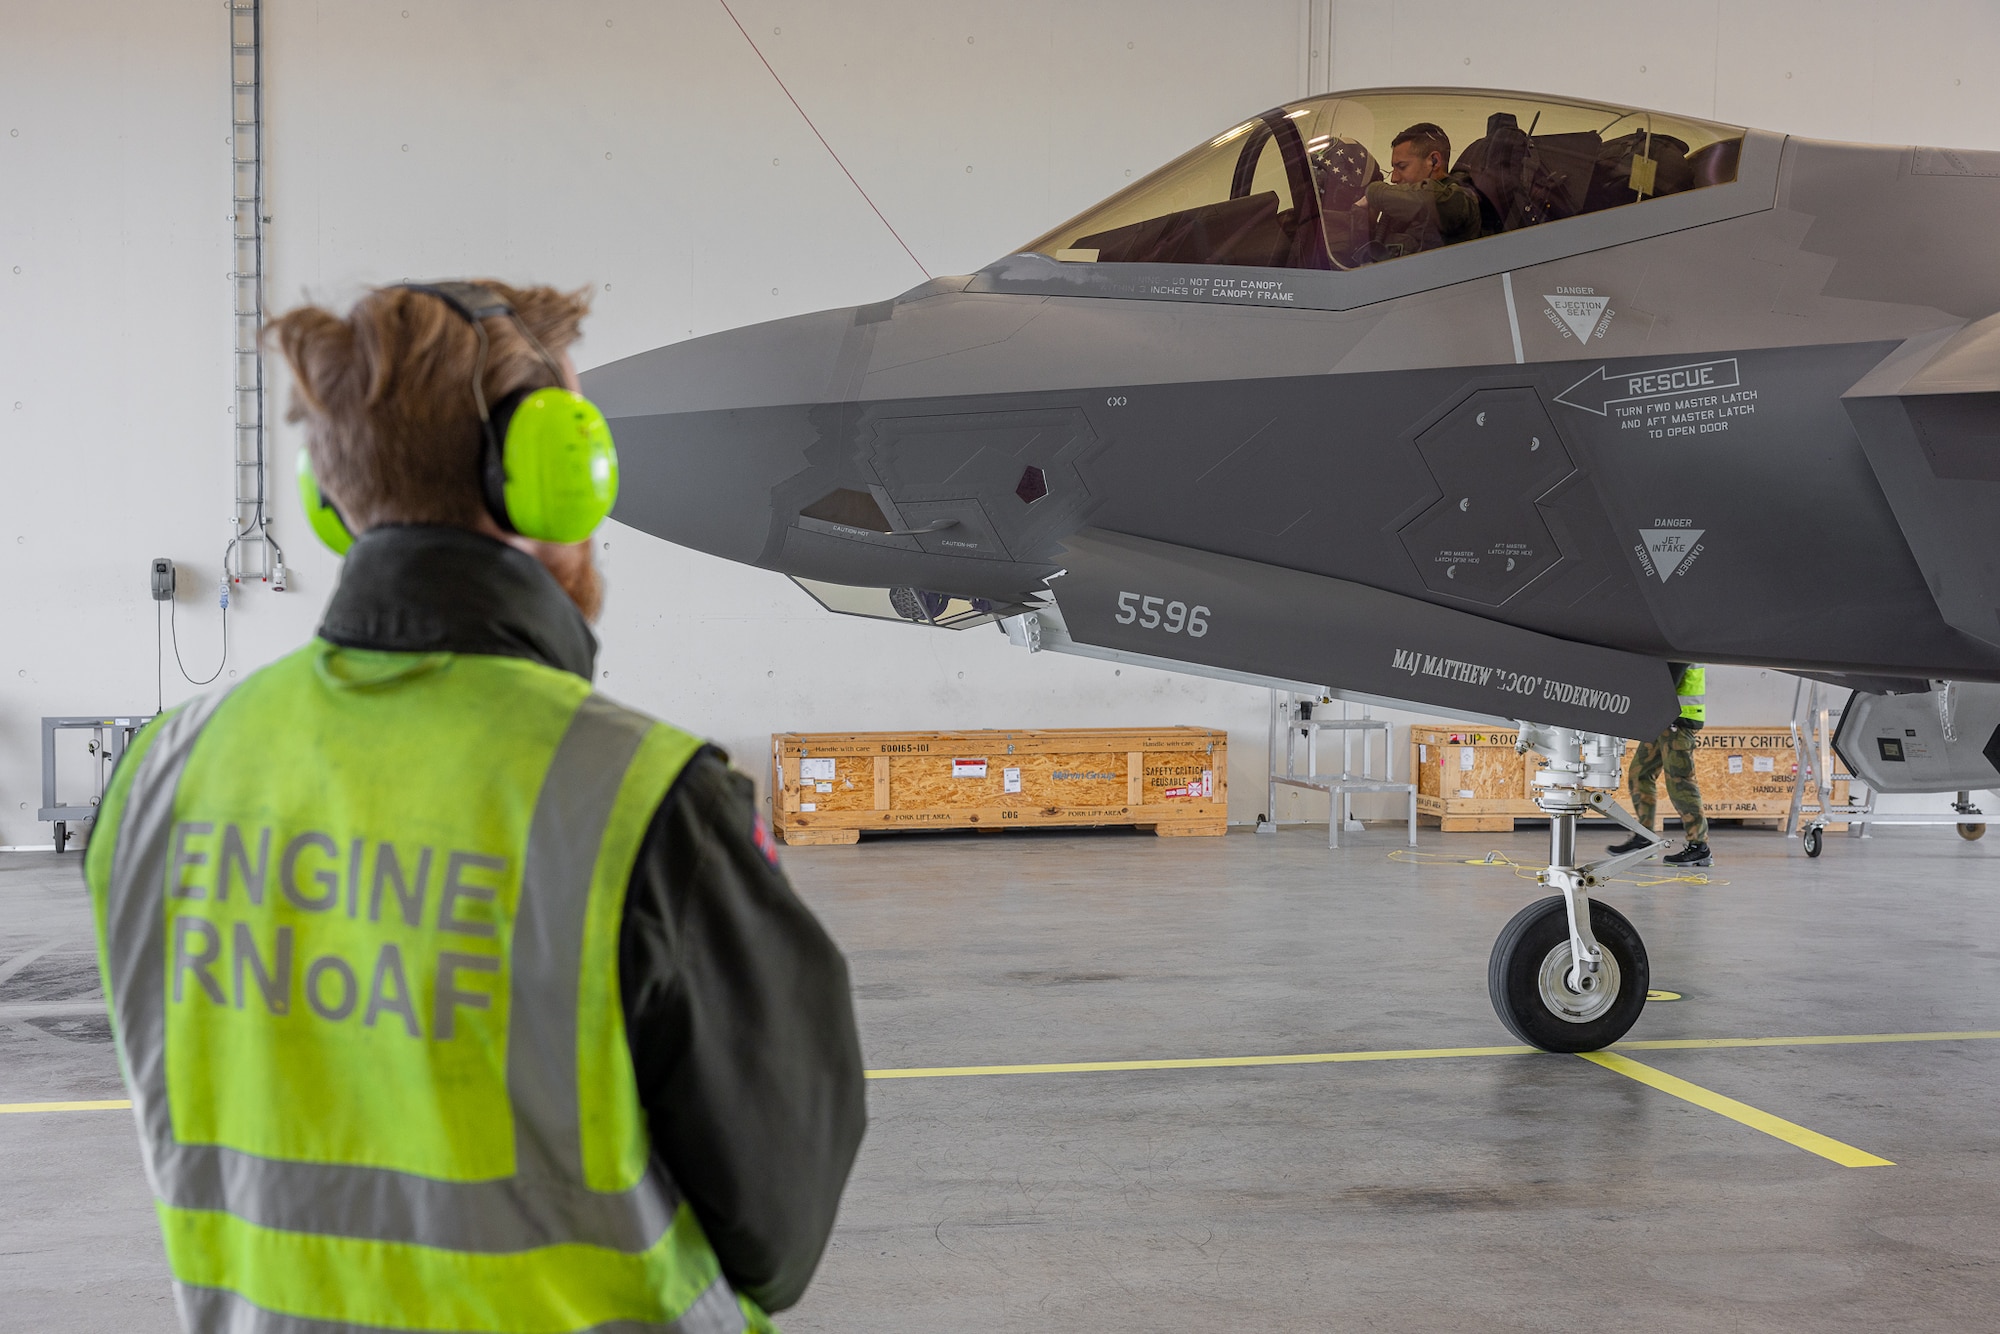 A Royal Norwegian Air Force Airman watches as a U.S. F-35 Lightning II pilot prepares to disembark the aircraft after a flight from RAF Lakenheath in the United Kingdom to Ørland Main Air Station in Norway, April 8, 2024. A team of Norwegian Airmen received the U.S. aircraft and pilot, and prepared the aircraft for its next mission. The mission marked the first time that Airmen from one nation’s military provided servicing to another nation’s F-35 aircraft without supervision. The cross servicing of aircraft between NATO partners highlights the future interoperability with fellow F-35 users across the European Theater.” (RNoAF photo by Ole Andreas Vekve)